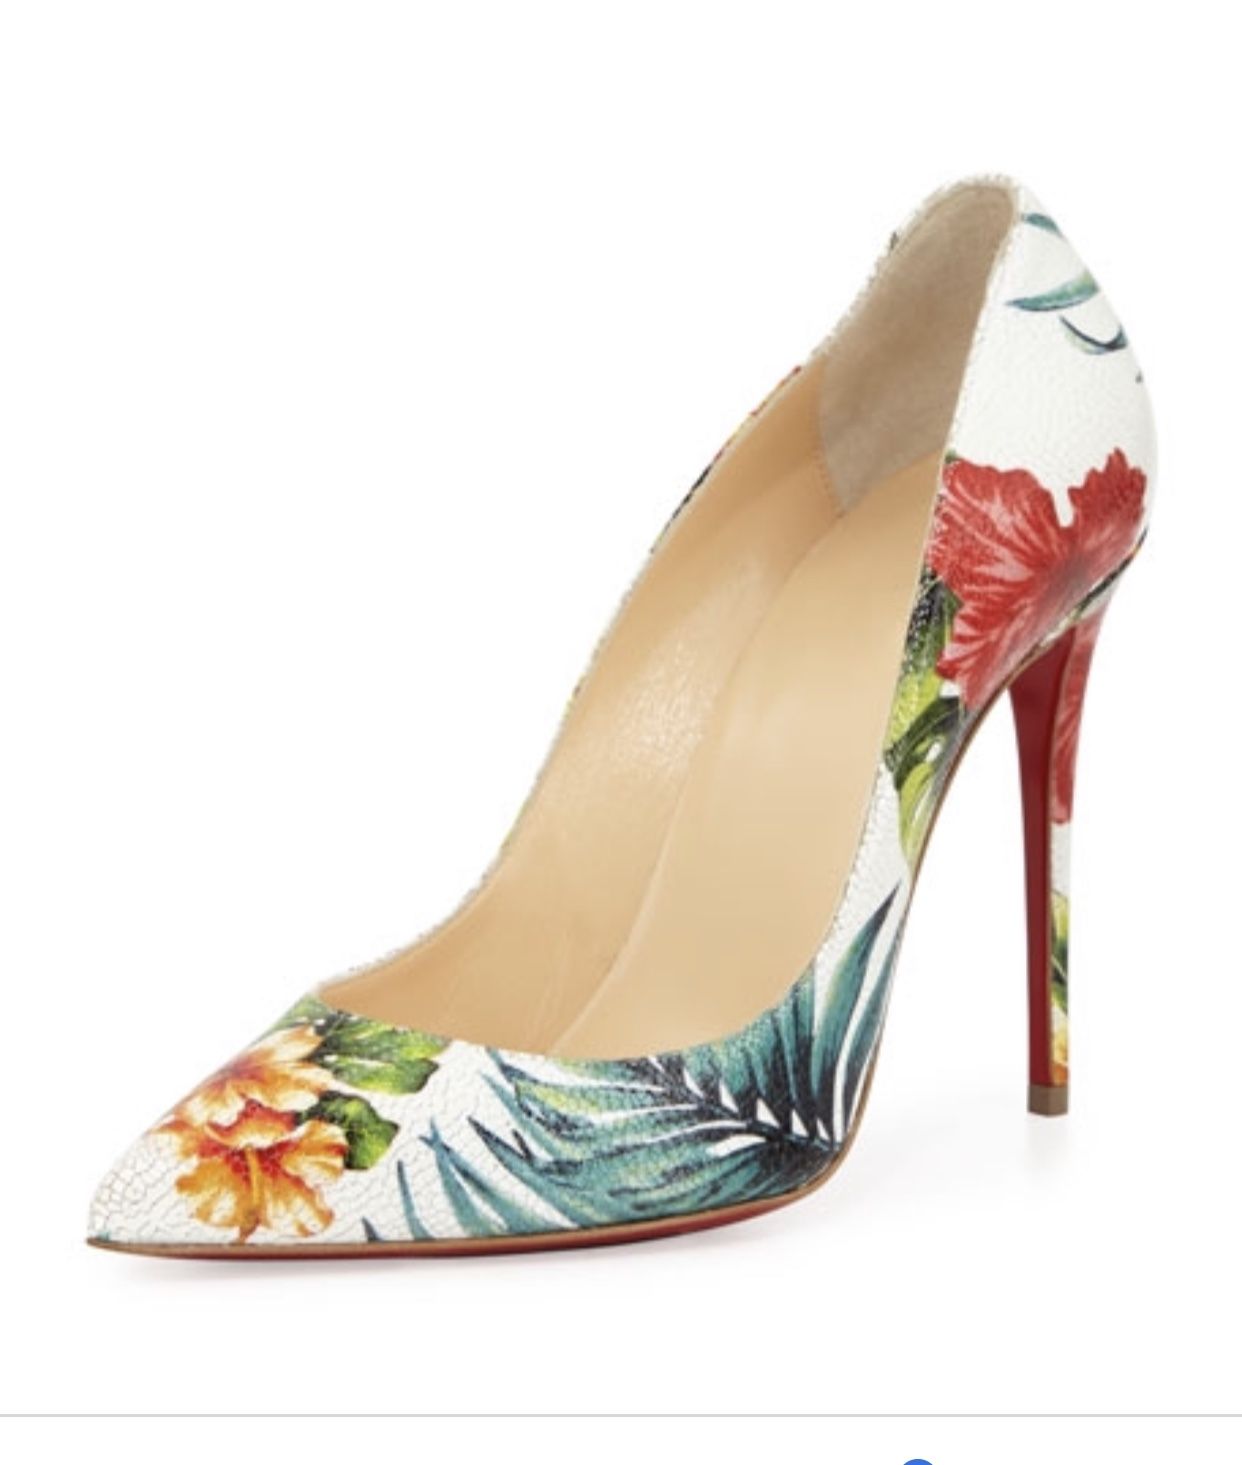 Christian Louboutin Pigalle Follies White Floral Heel Pumps